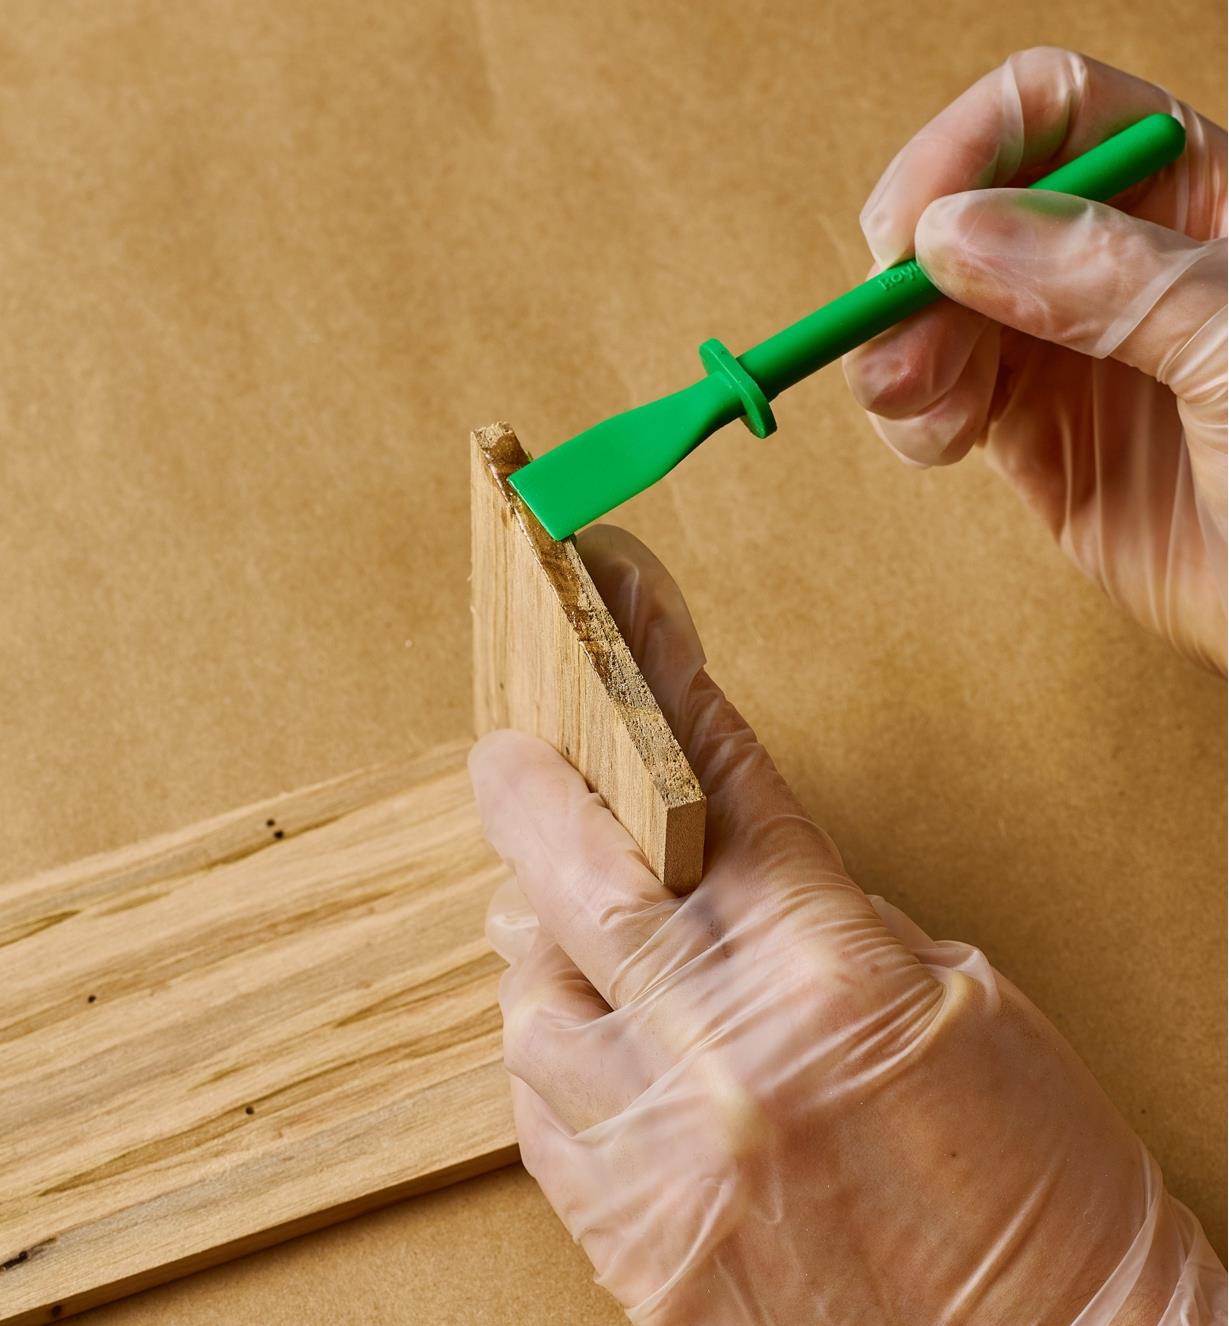 Applying glue on the ends of a piece of wood with a glue spreader